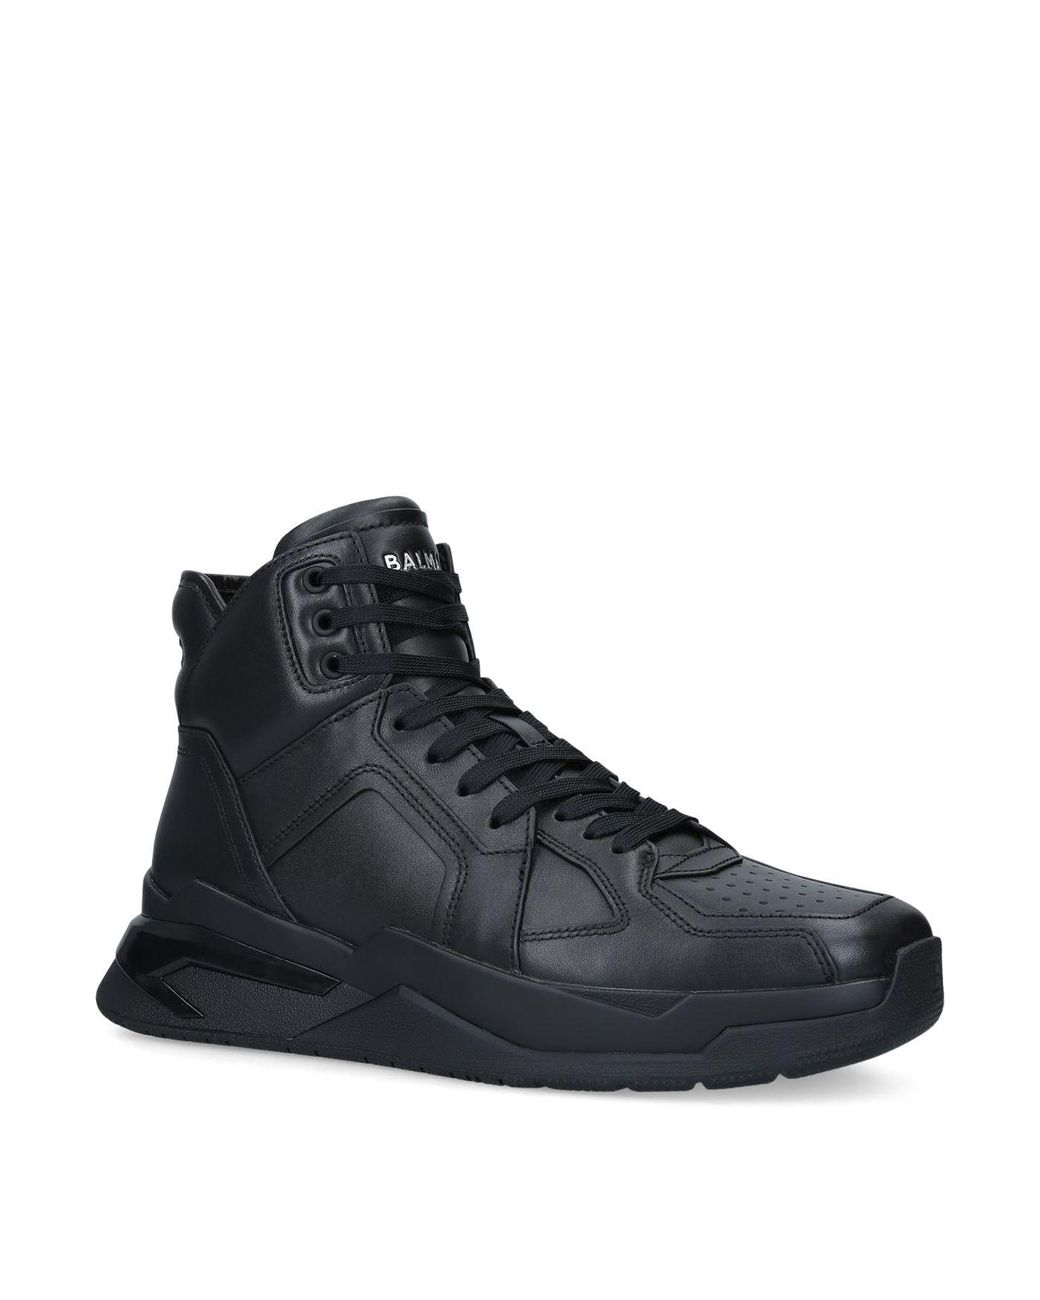 Balmain Leather B Ball High-top Sneakers in Black for Men - Lyst